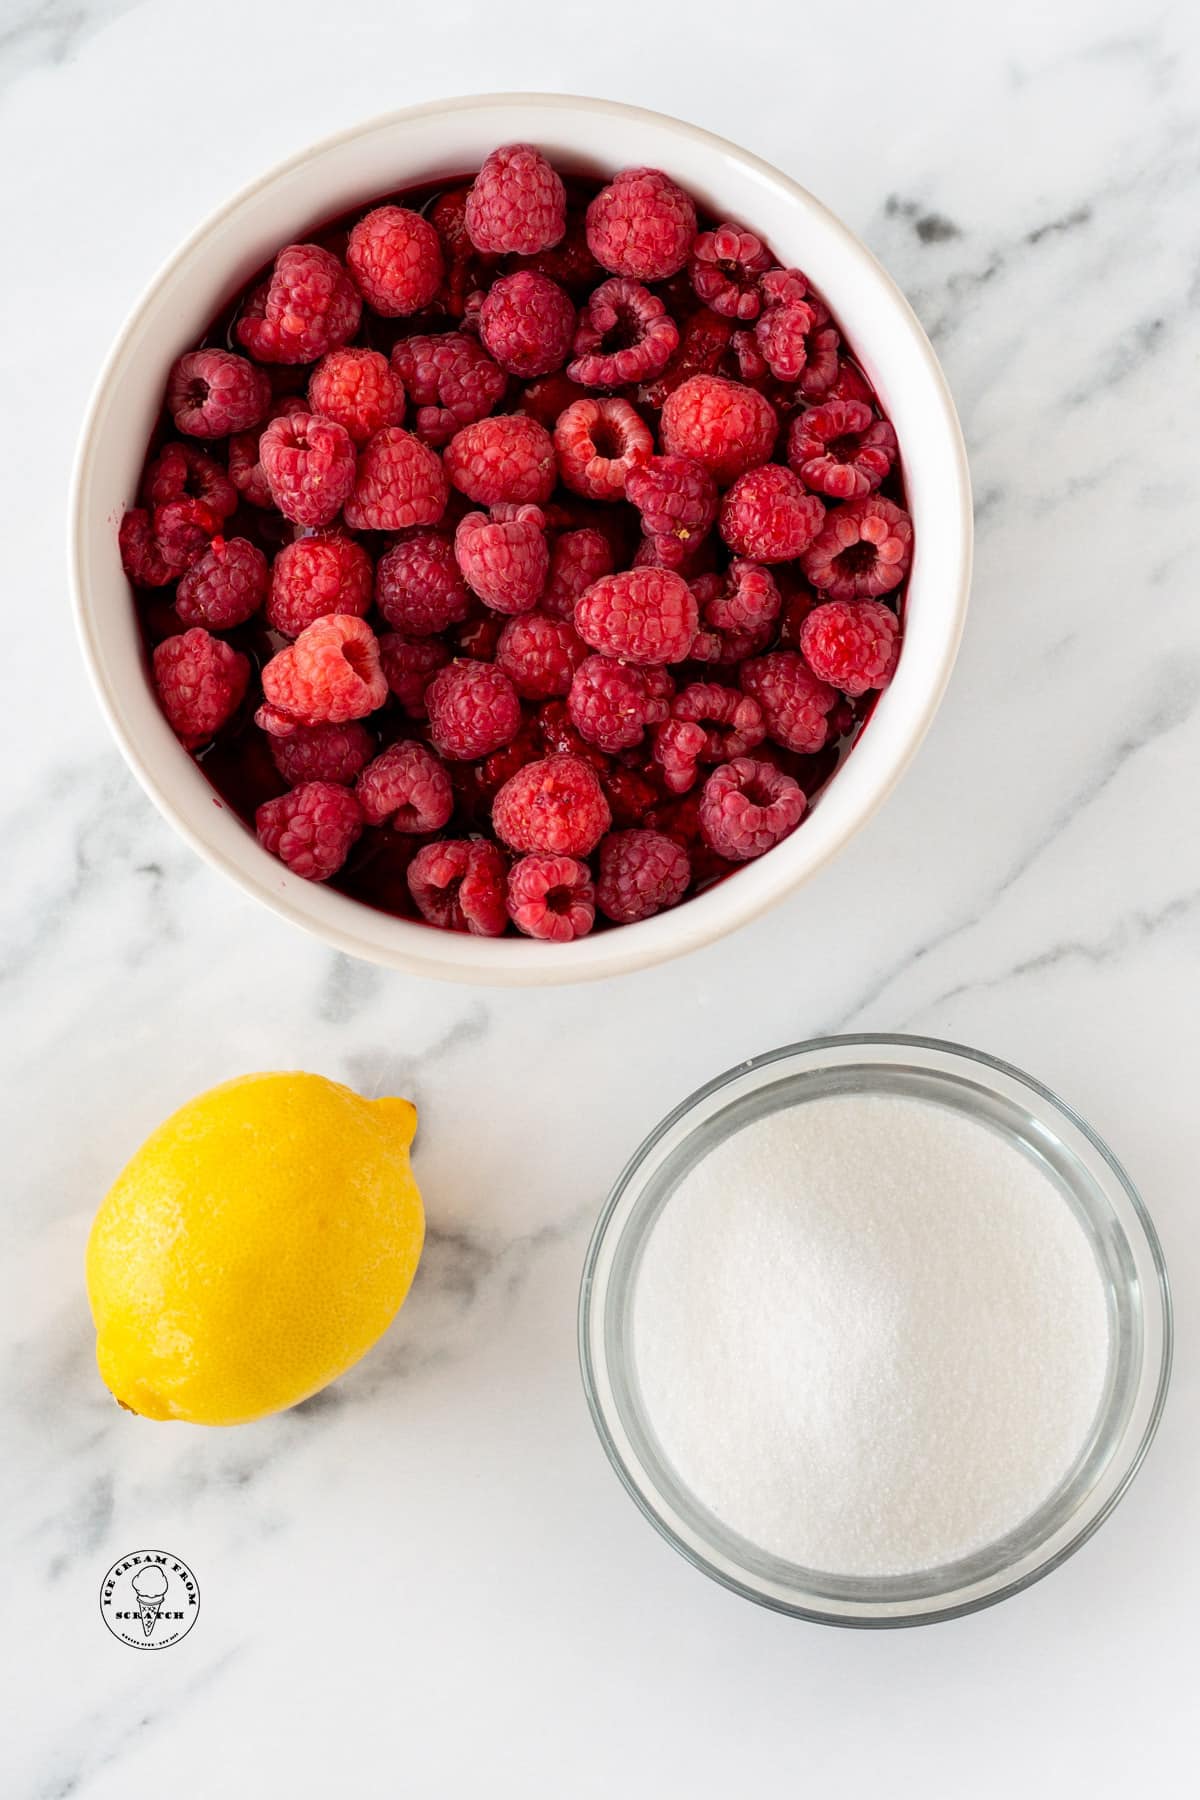 A bowl of raspberries, a bowl of sugar, and a lemon.